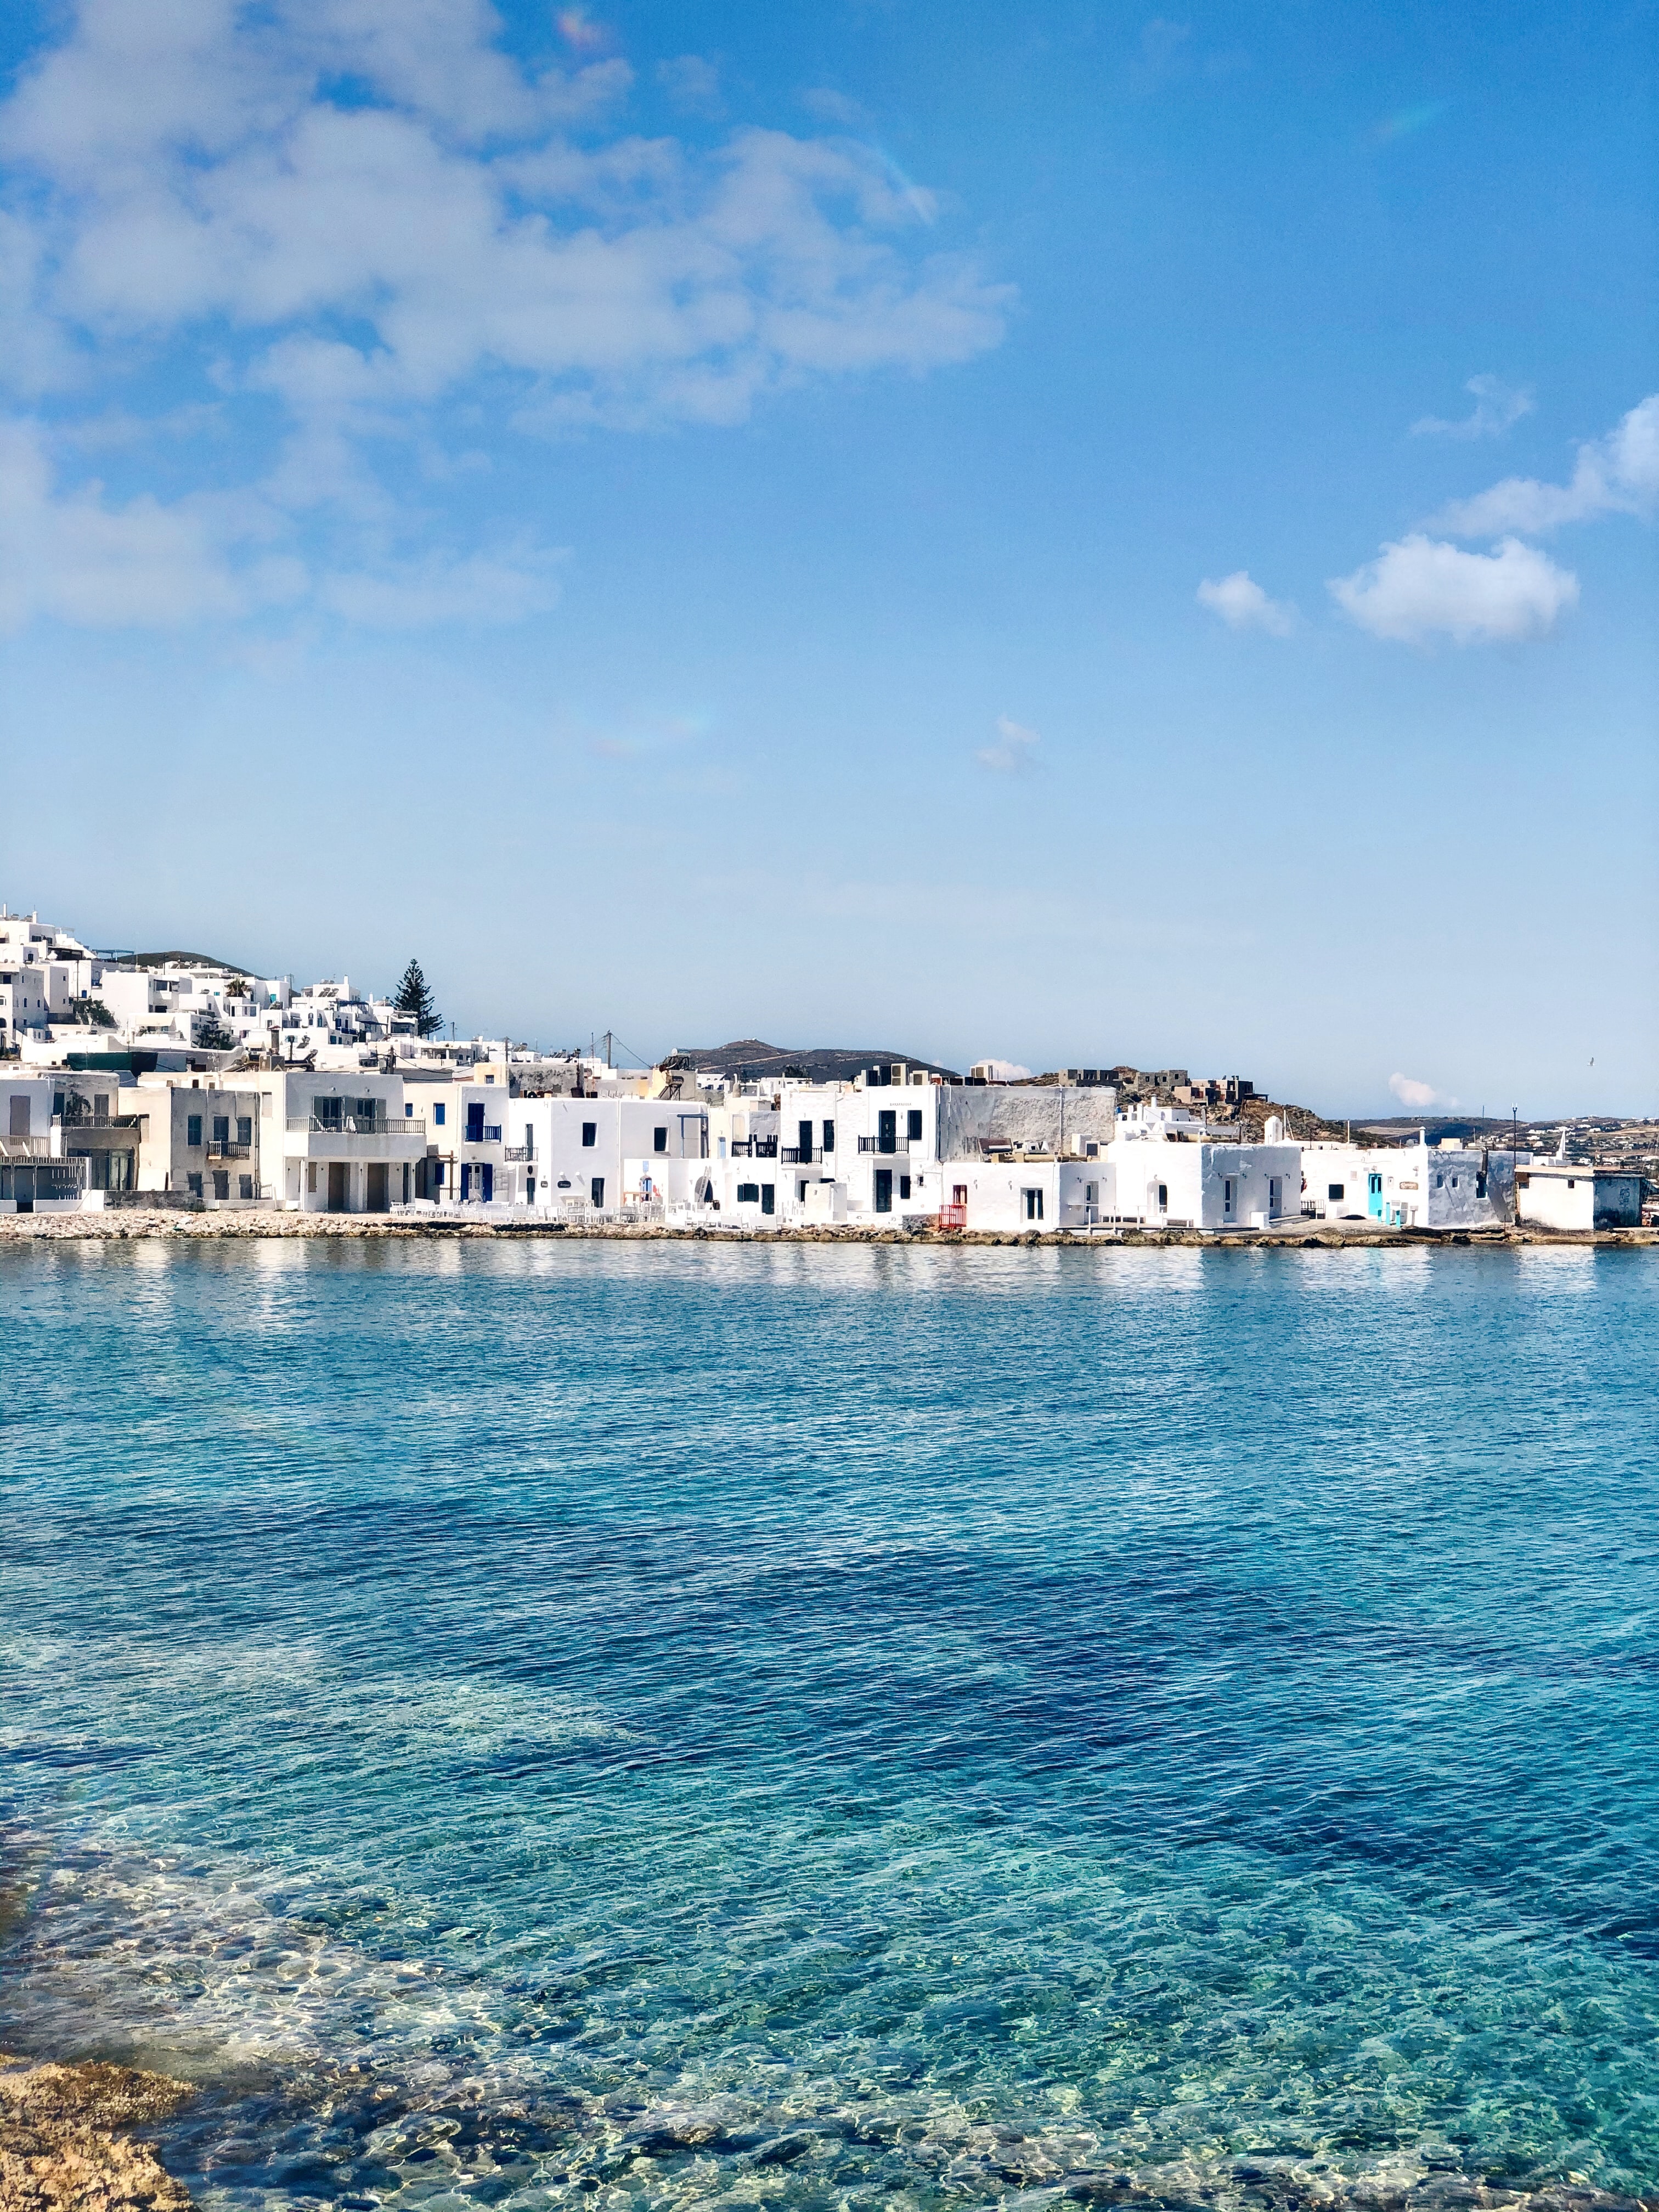 The small and picturesque fishing village of Naoussa in Paros is a great place to walk around and get lost in the cobbled alleys.

